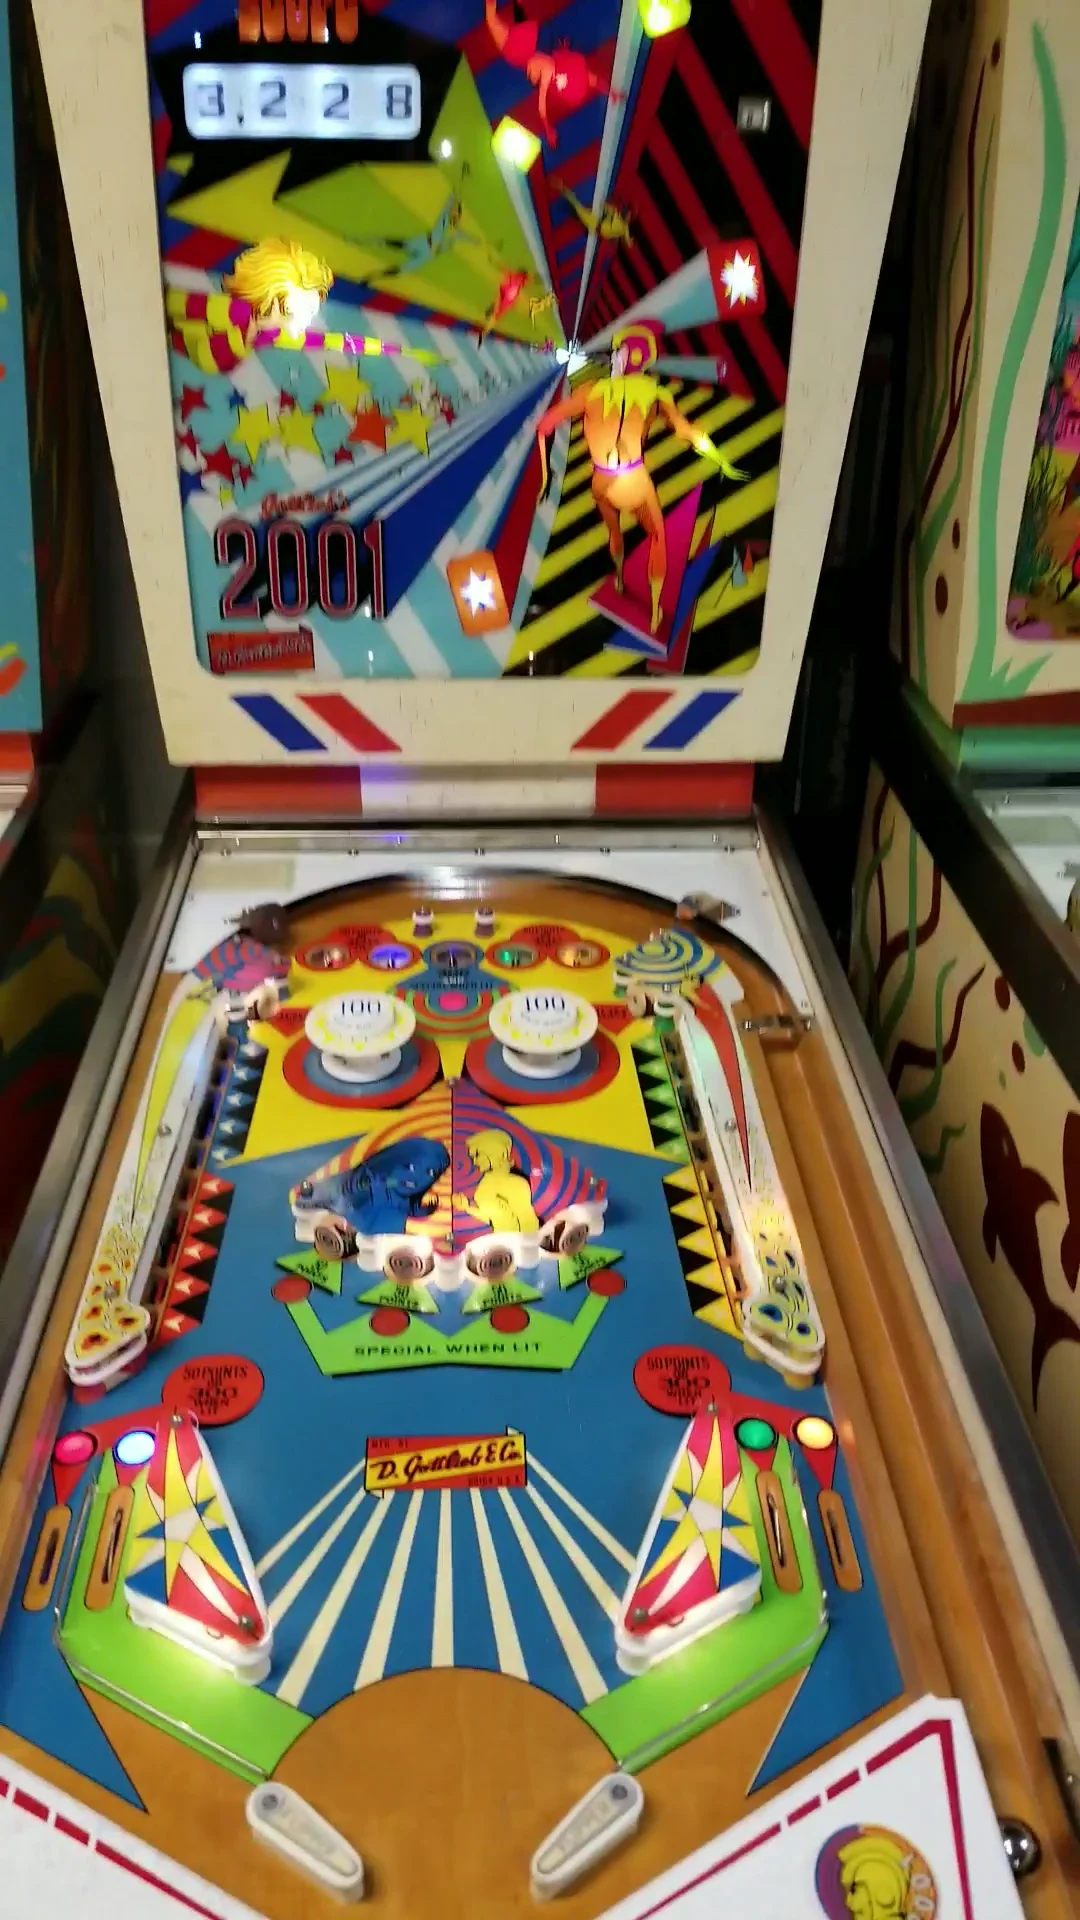 Outer Space - Pinball by Gottlieb, D. & Co.